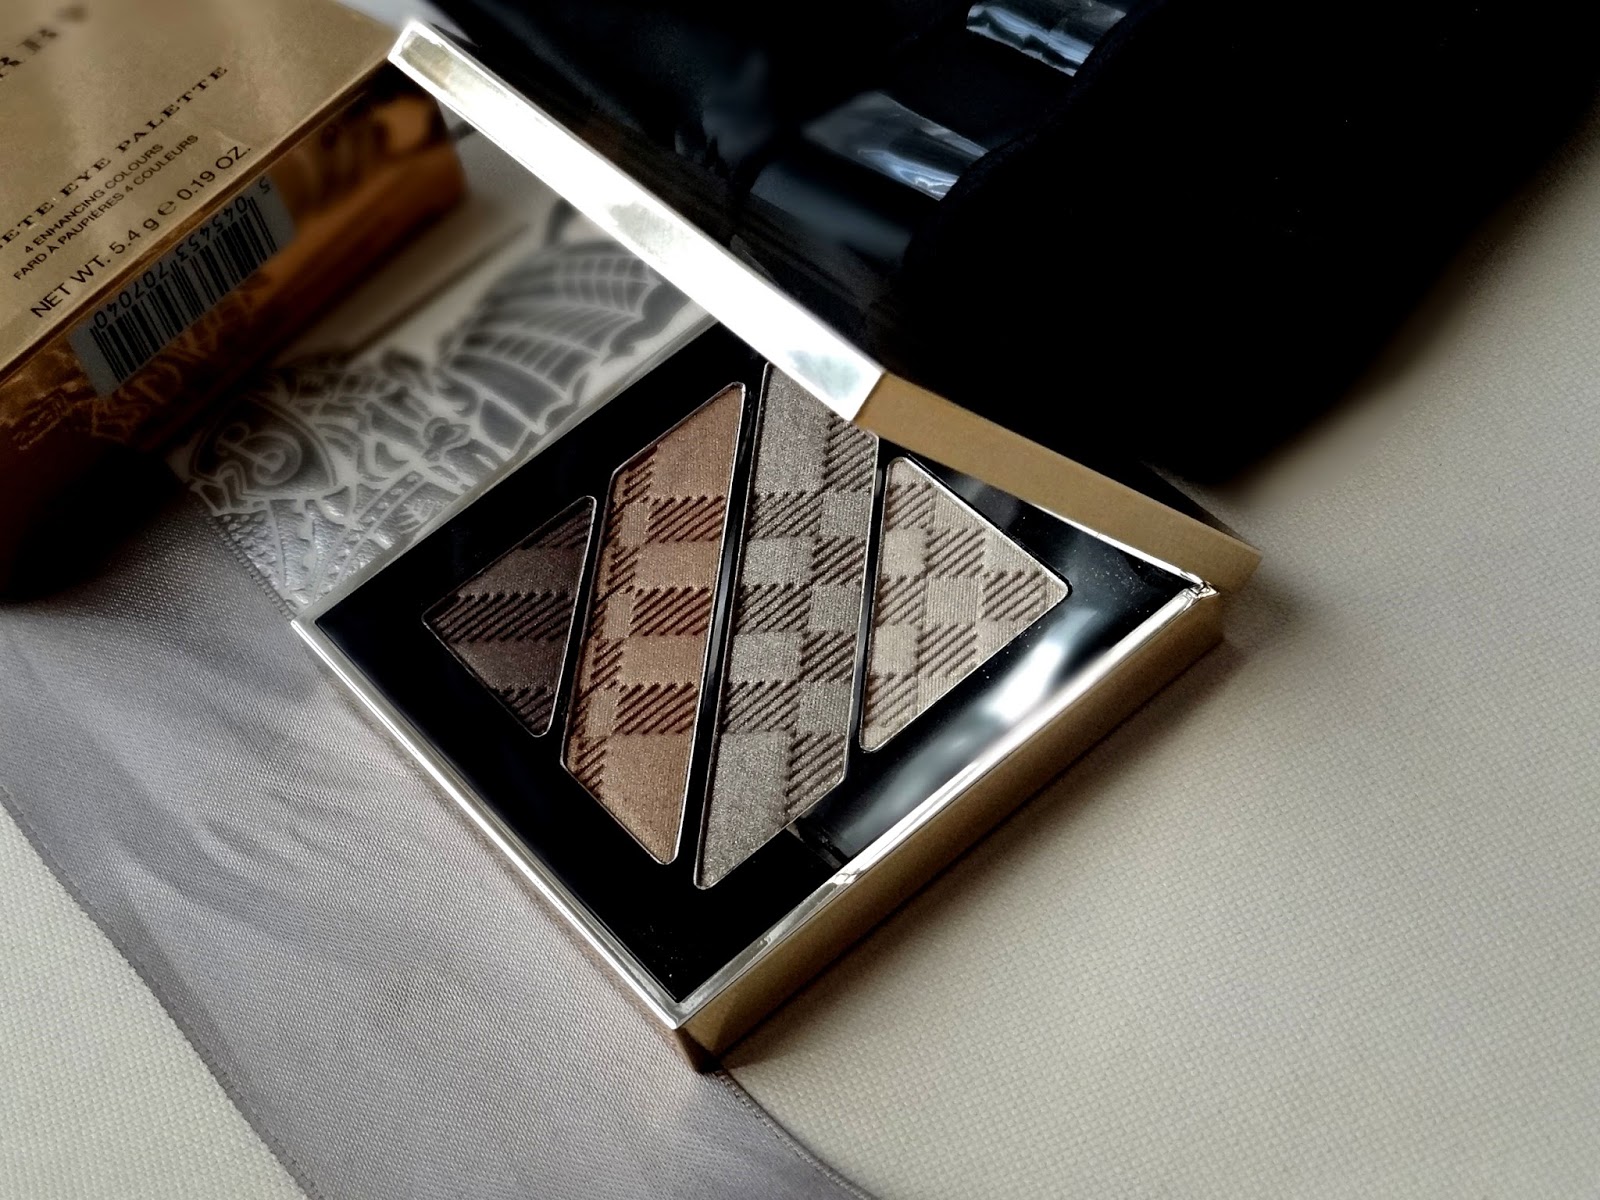 Burberry Beauty Winter Glow Makeup Collection - Complete Eye Palette in Gold No.25